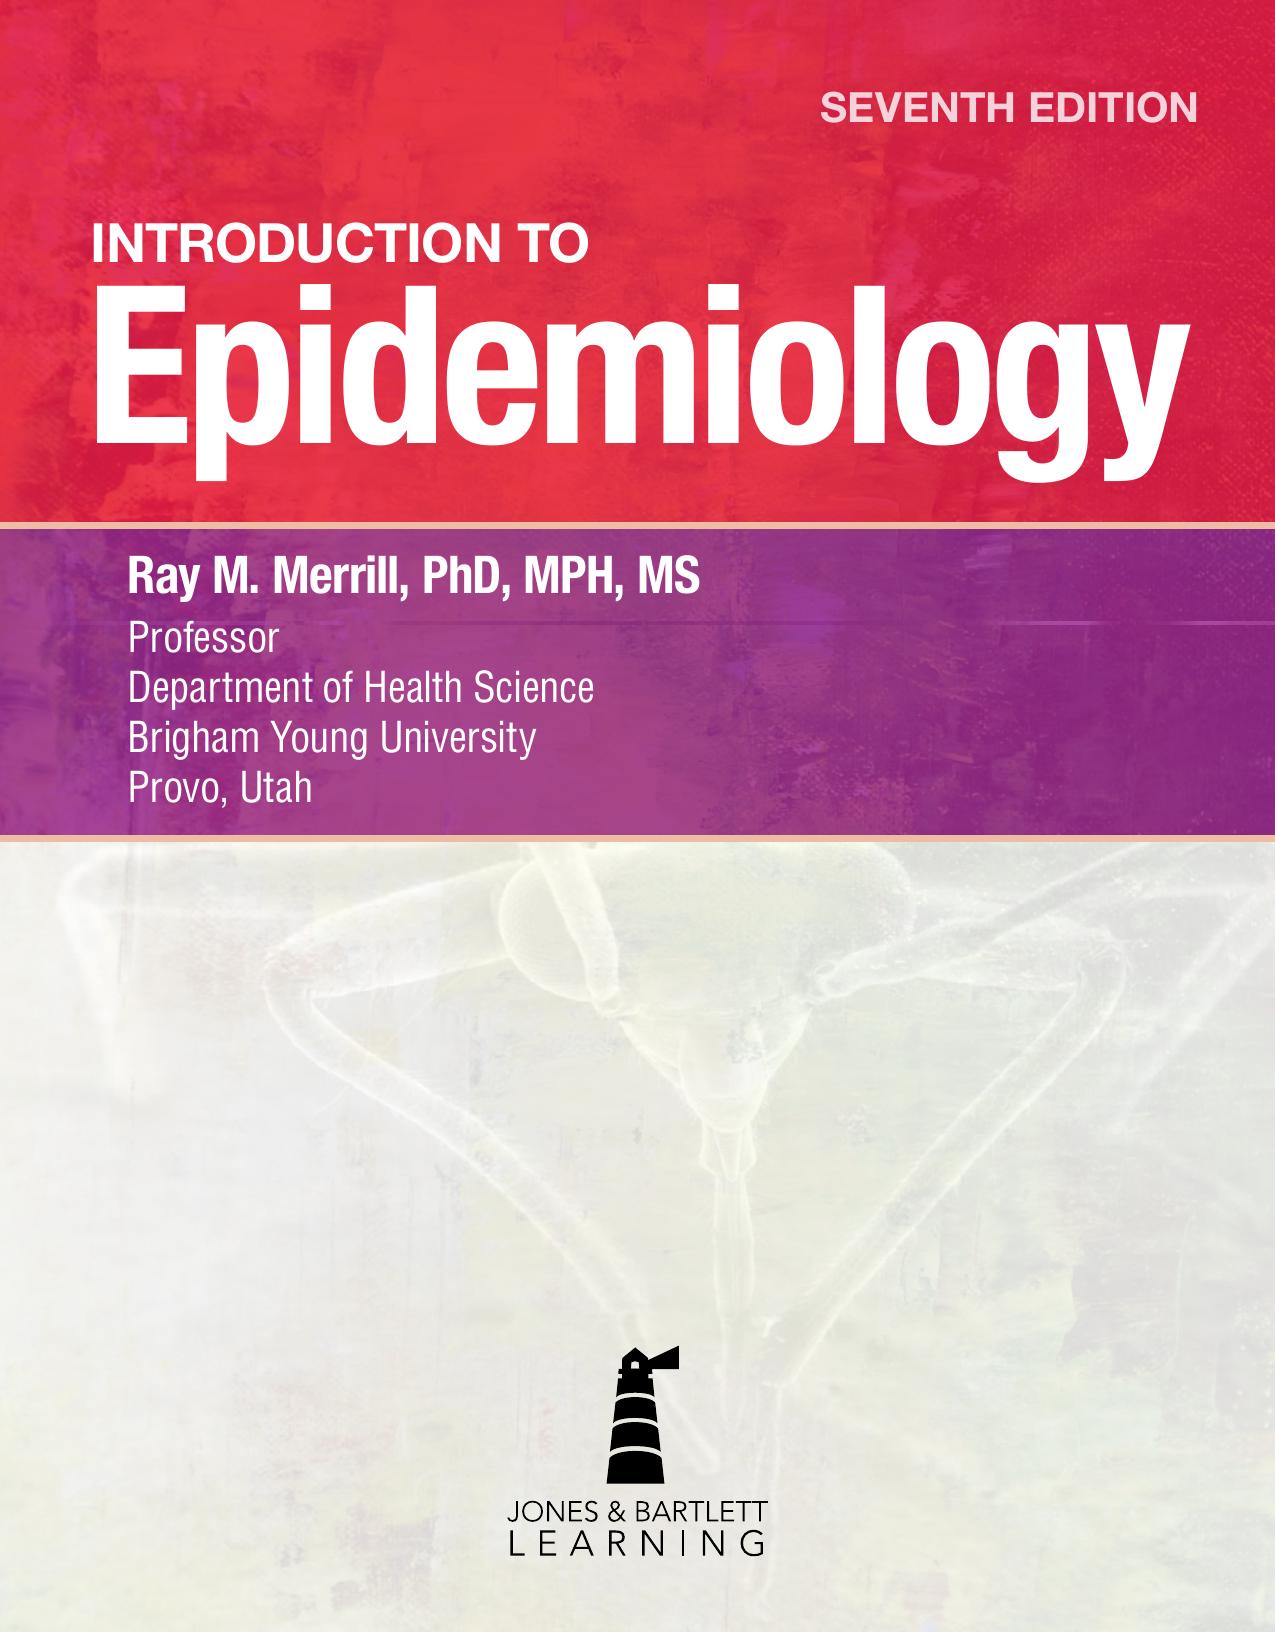 [Ray M. Merrill] Introduction to Epidemiology(z-lib.org)